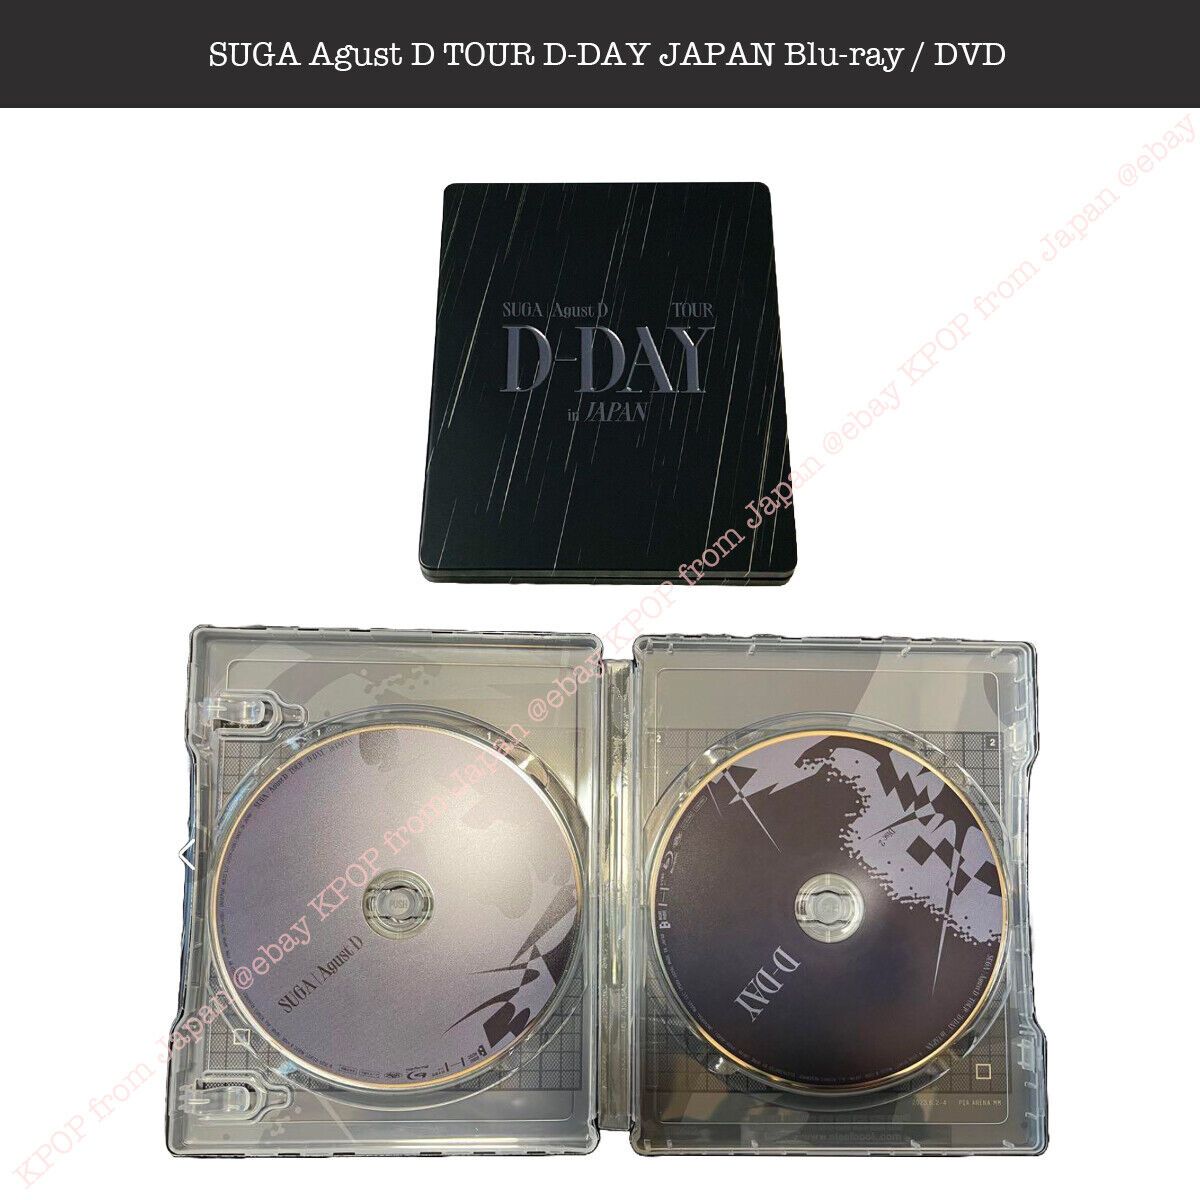 USED SUGA Agust D TOUR D-DAY JAPAN Official Blu-ray or DVD ONLY